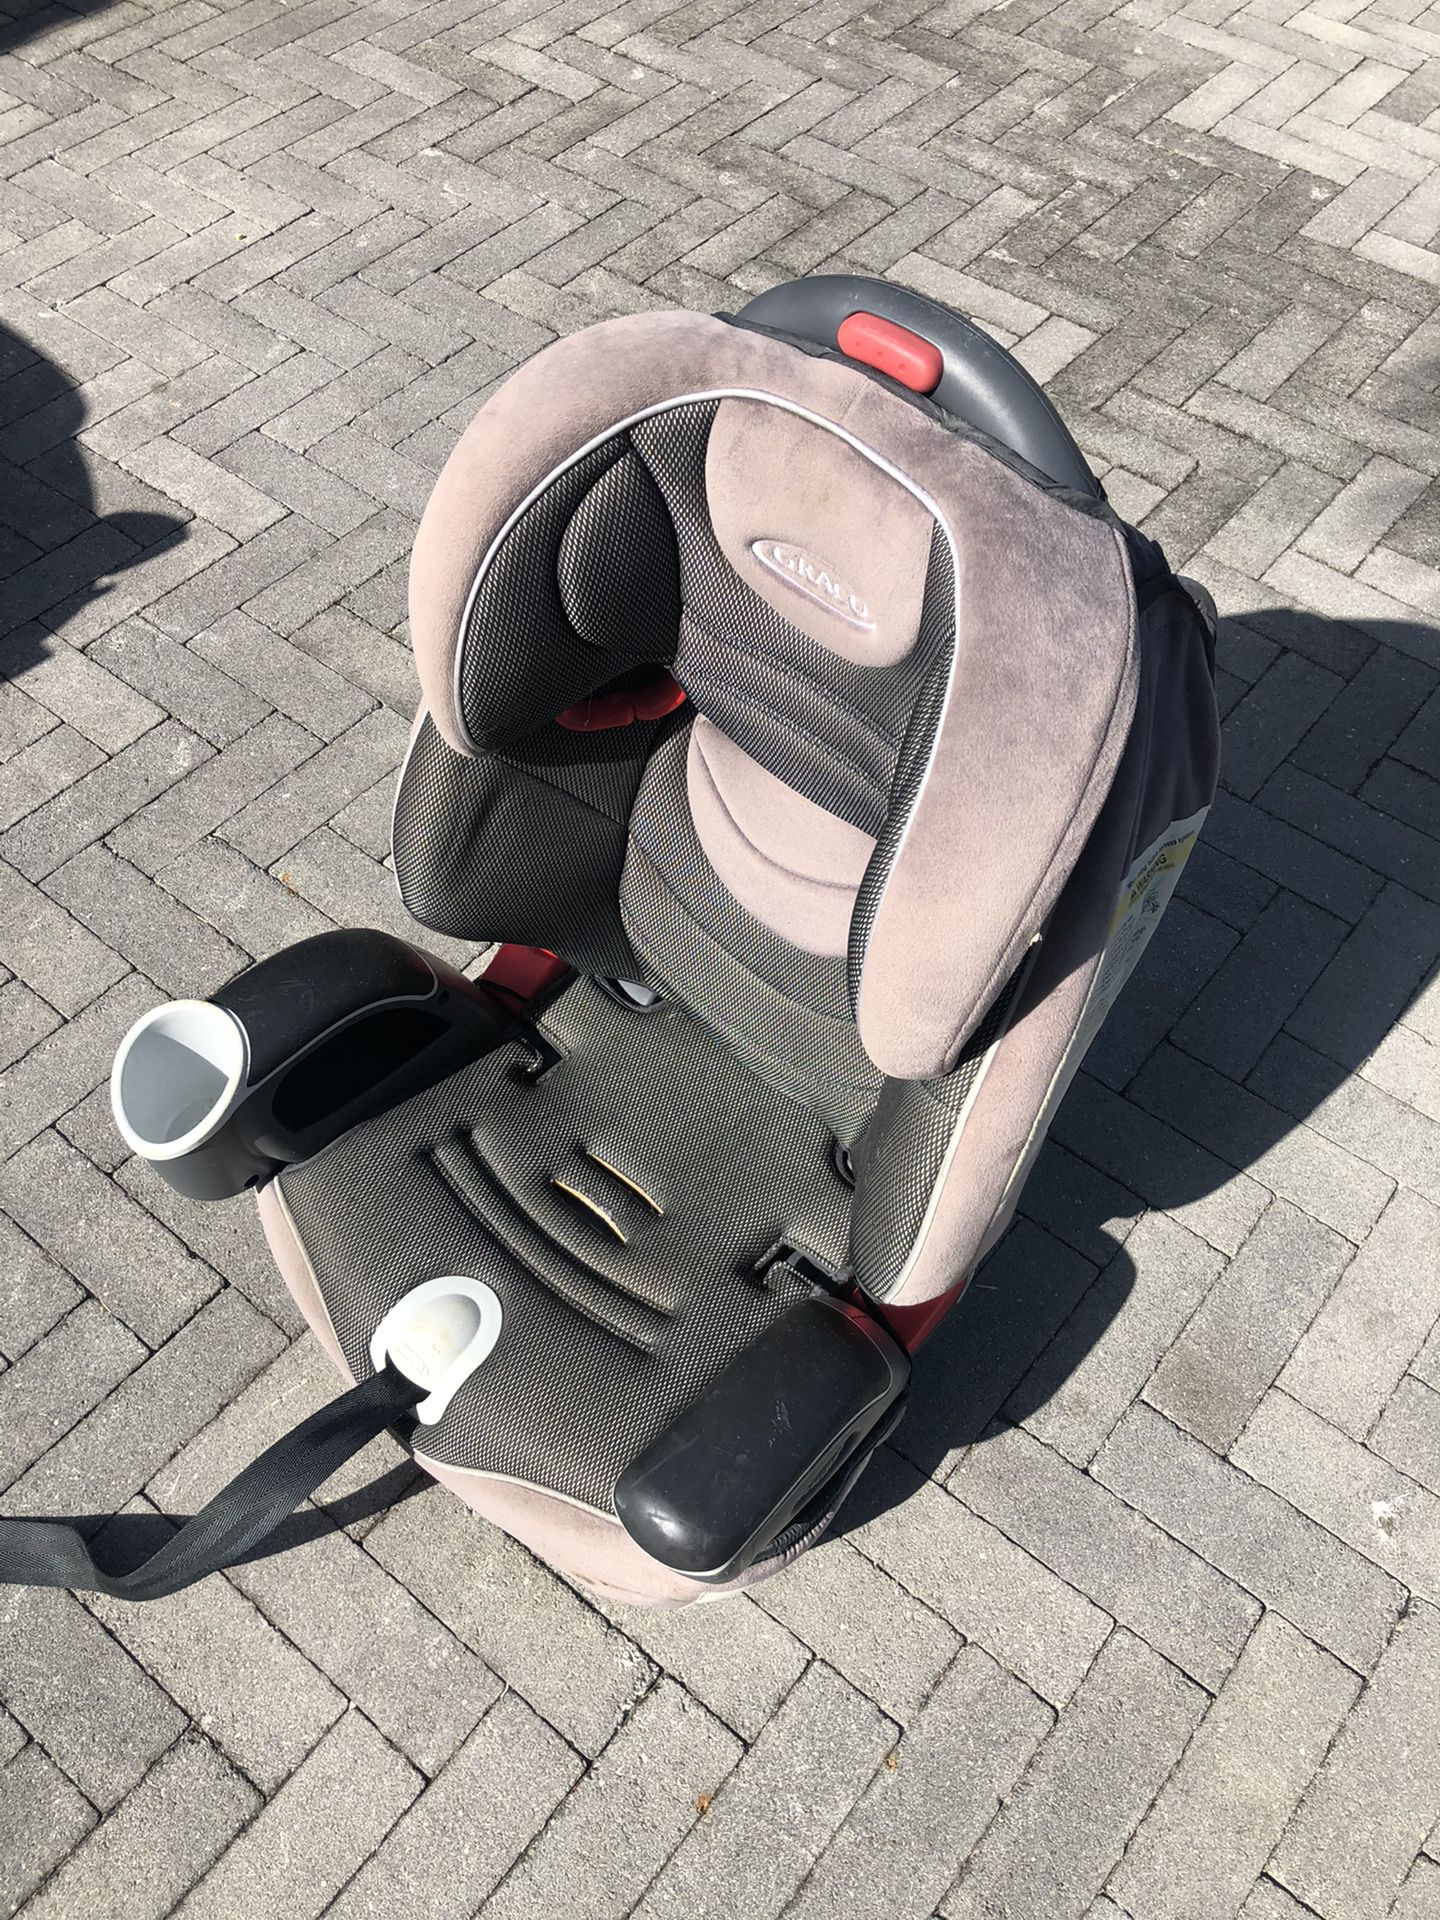 Graco car seat & booster 2-1